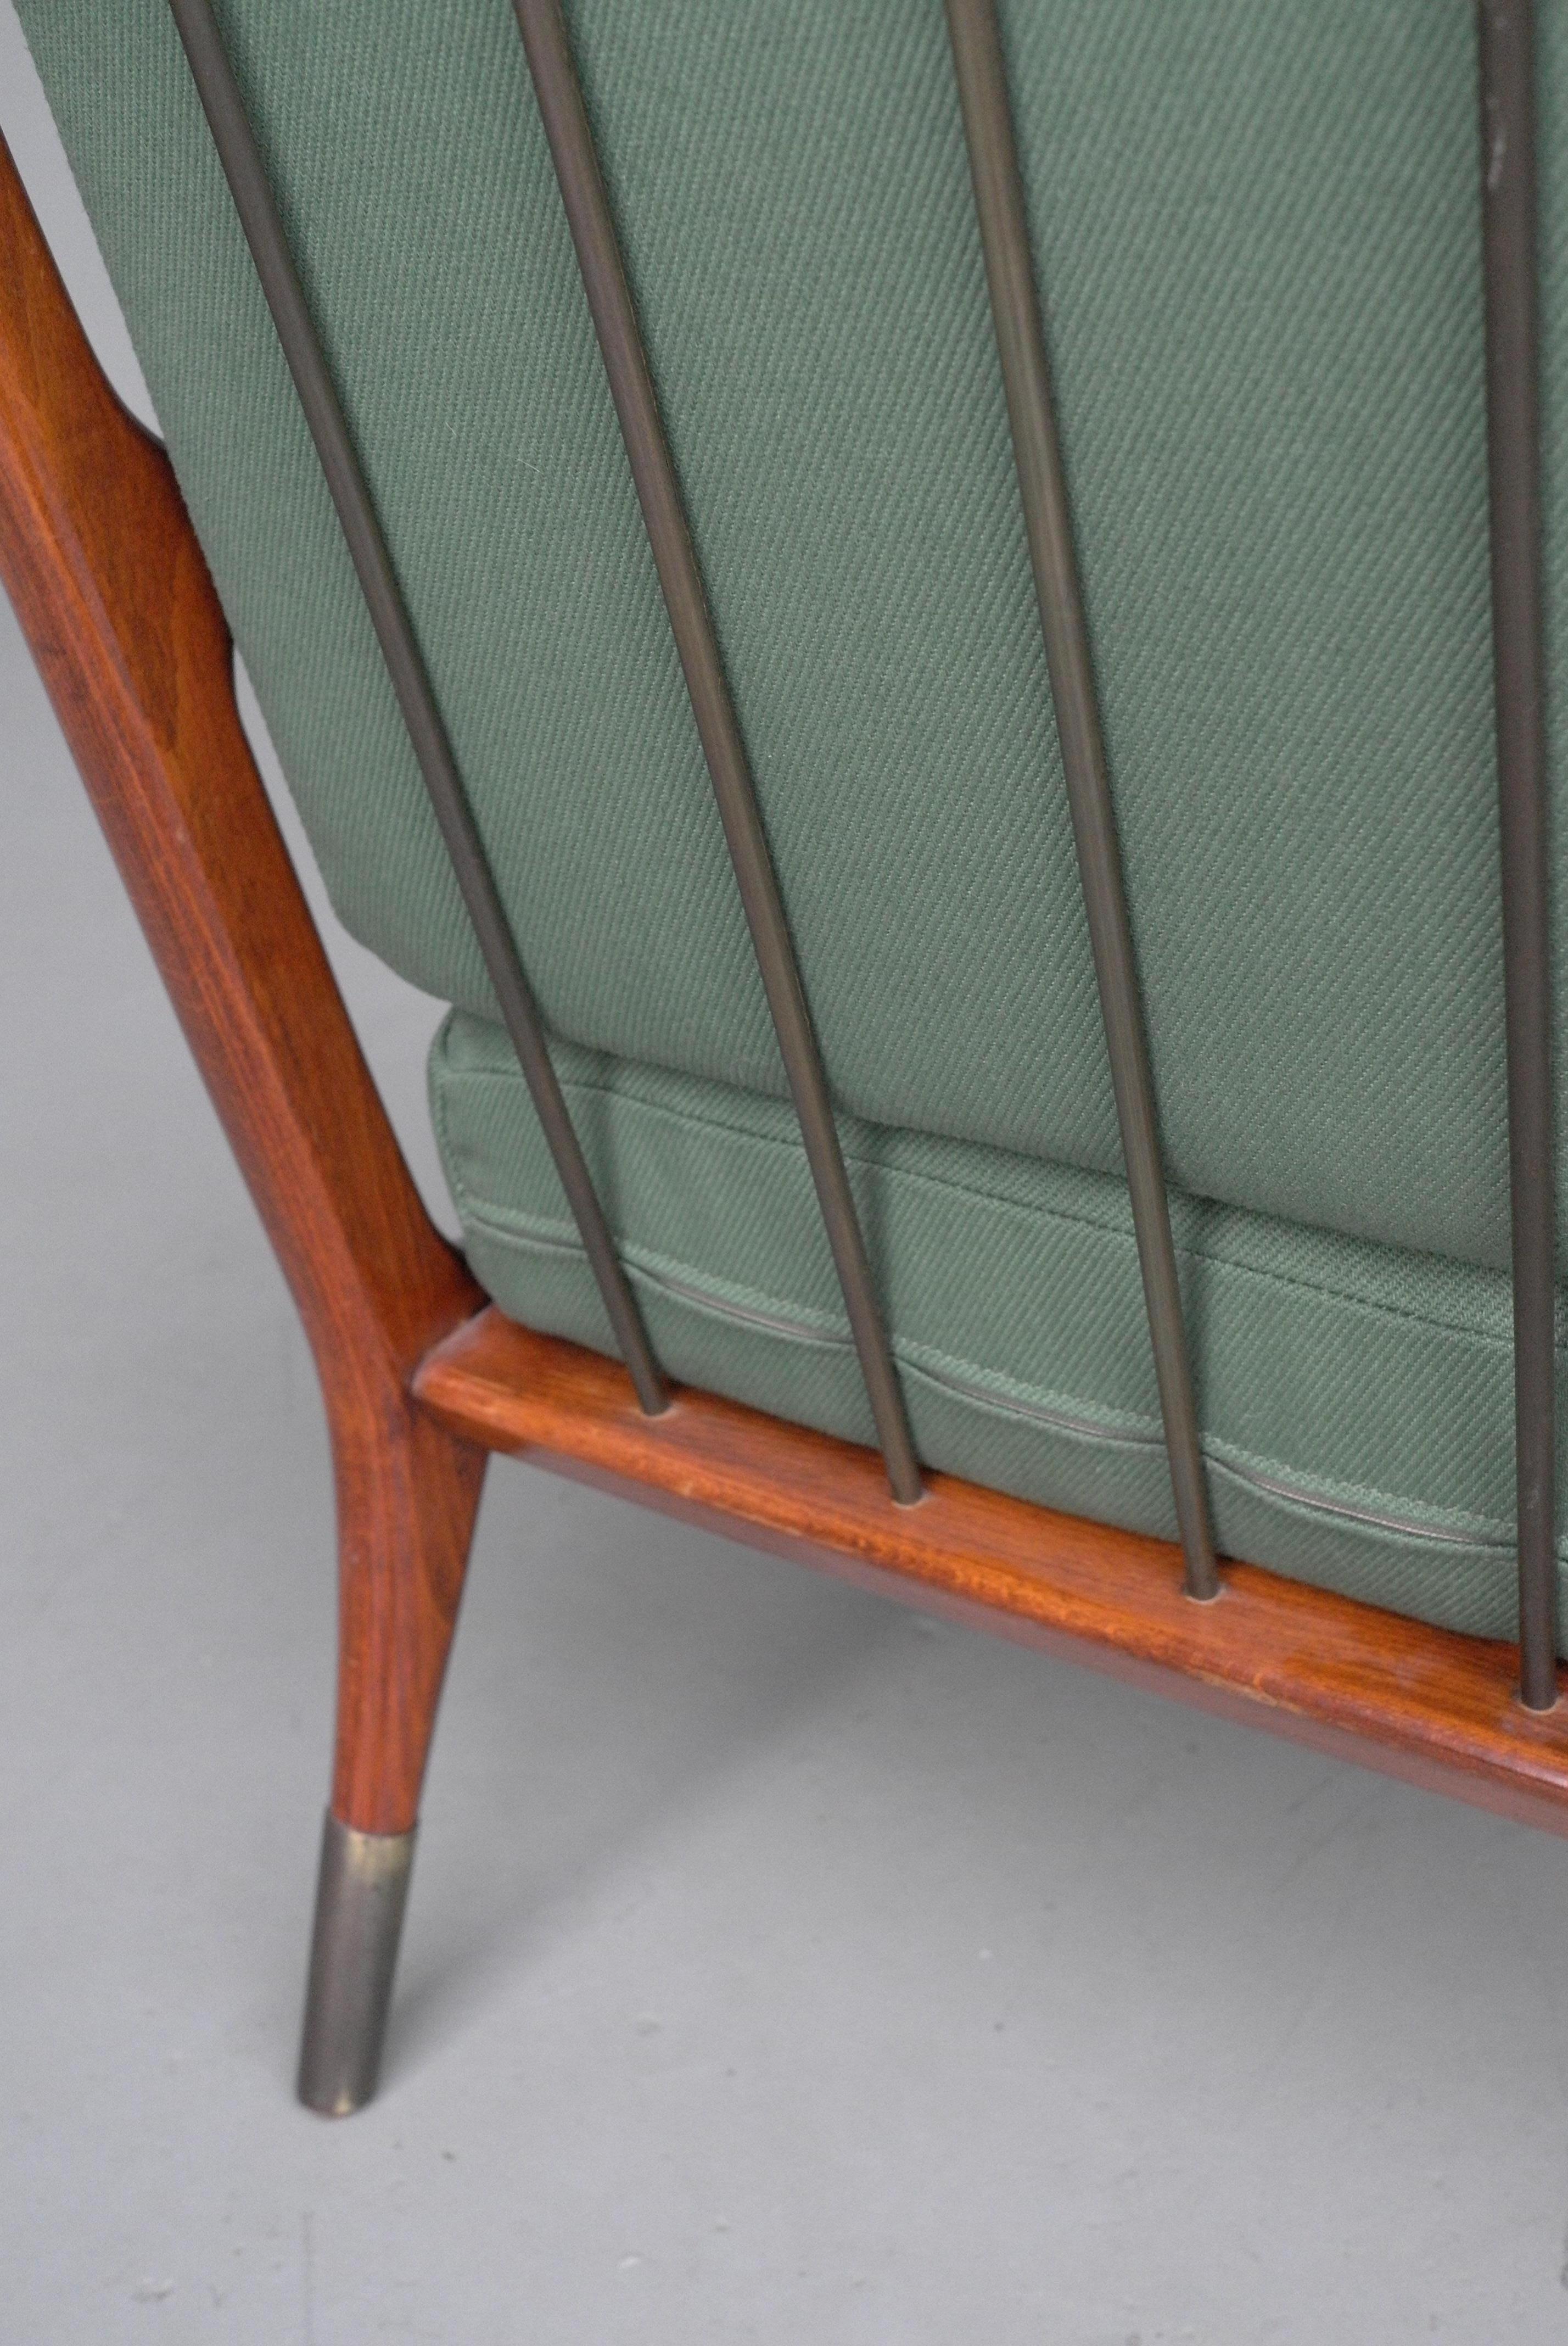 Slender wooden lounge chair with fine brass feet and brass bar back.

Recent newly upholstered in green fabric. Made in Italy, circa 1955.